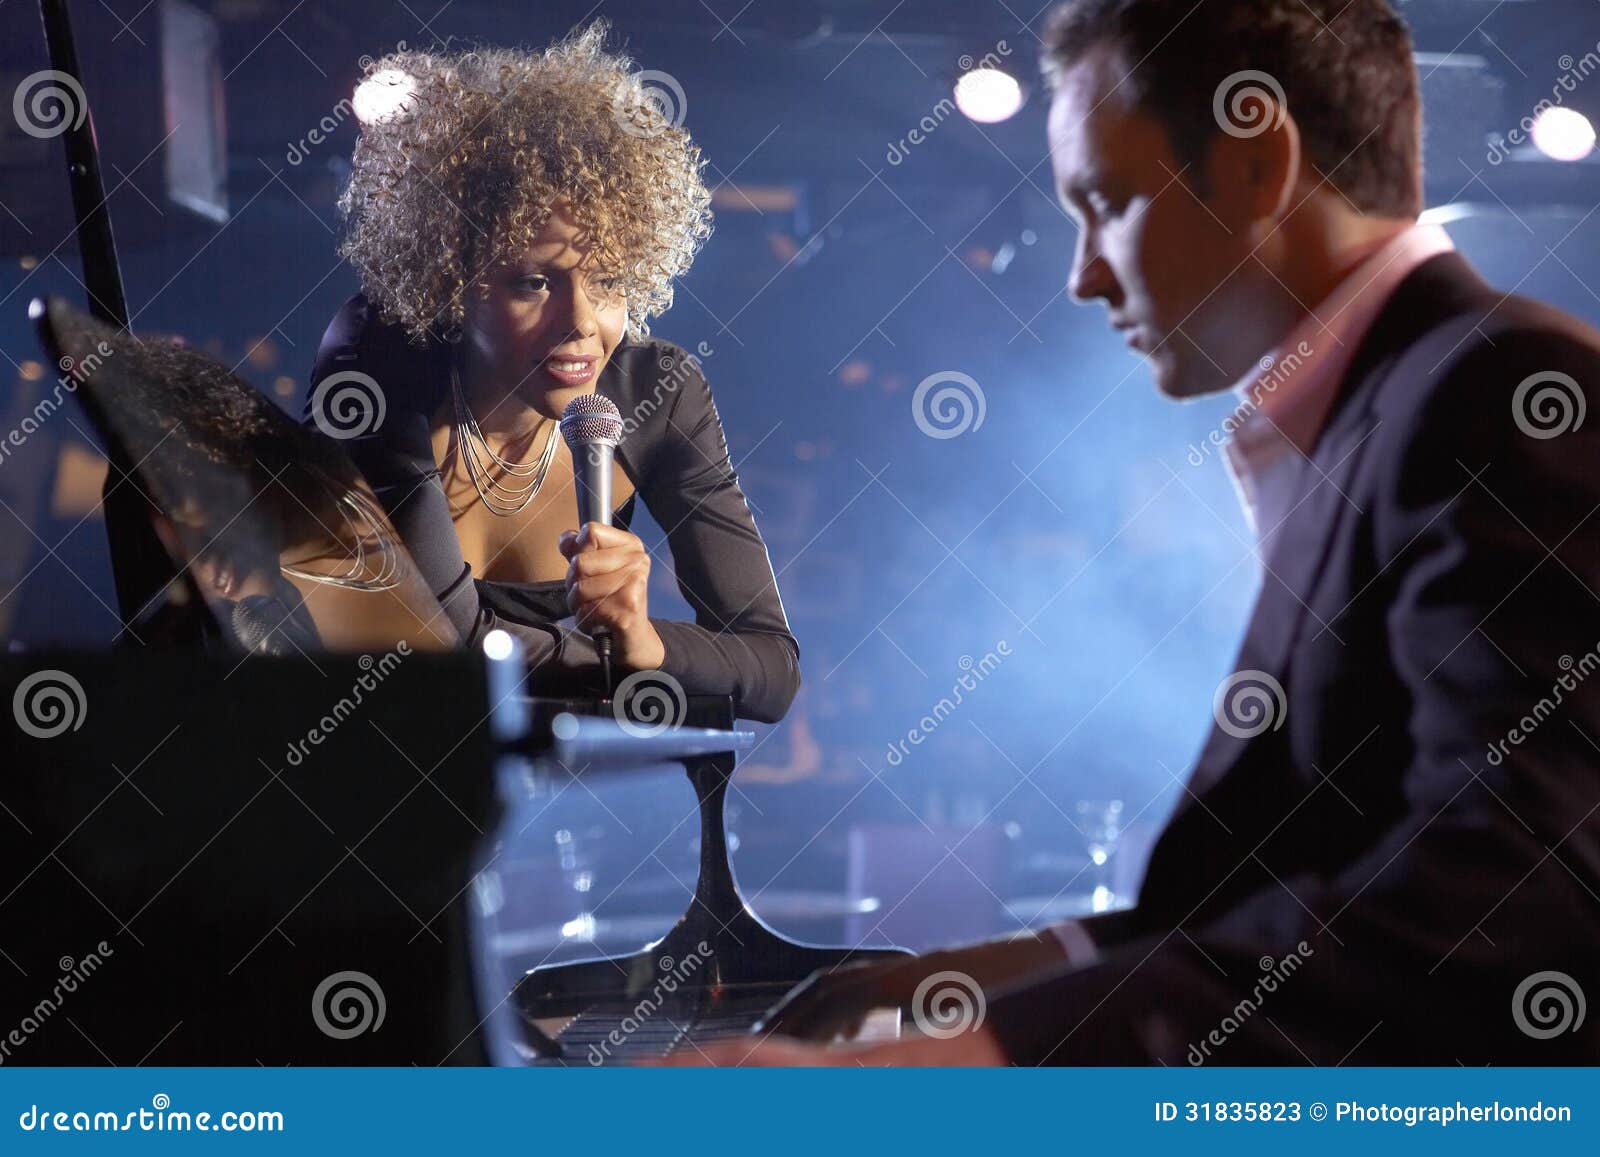 singer and pianist on stage